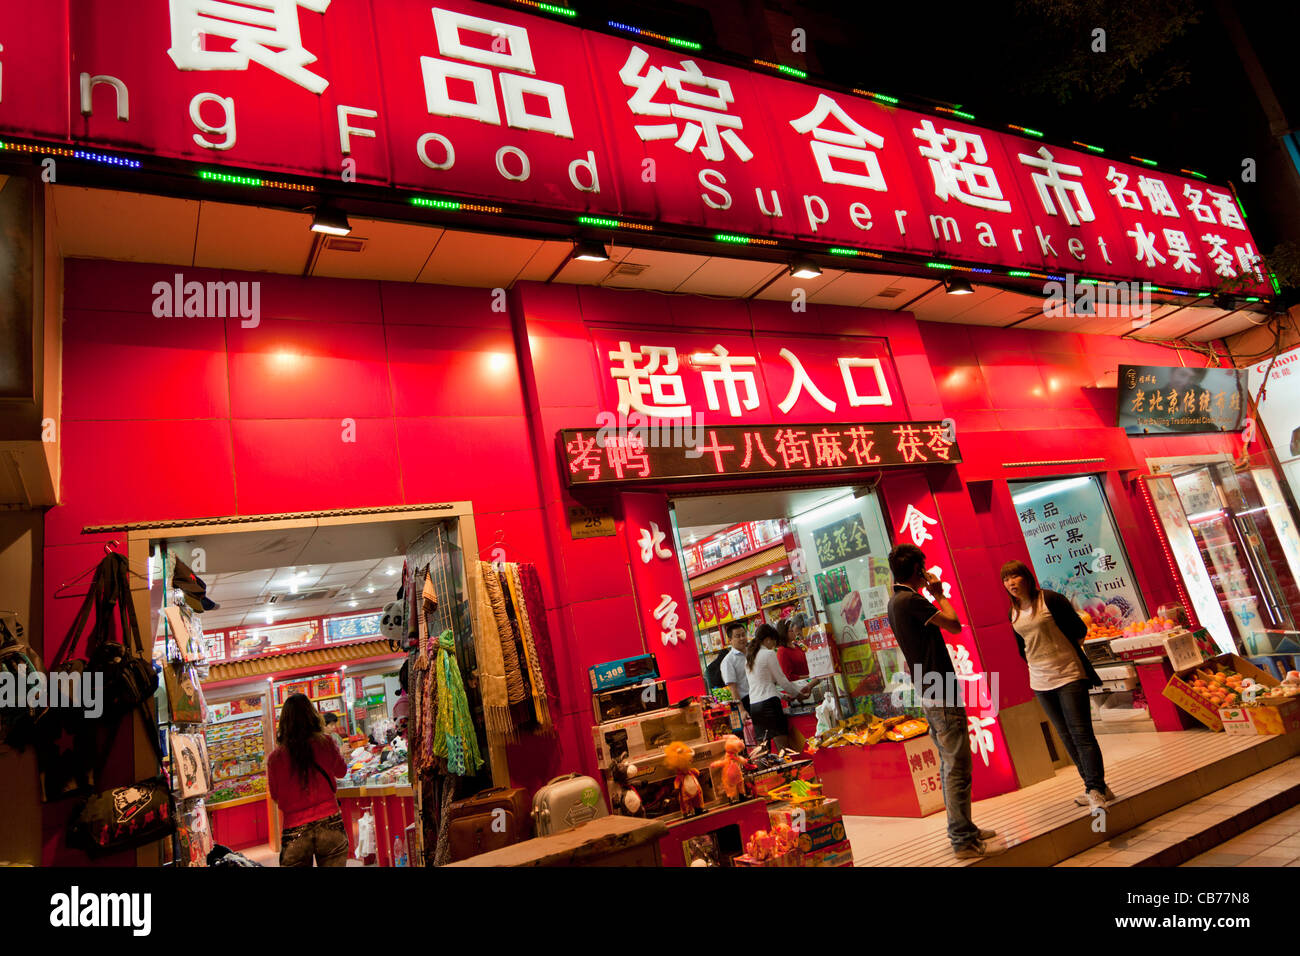 exterior of chinese supermarket food items for sale Beijing district, PRC, People's Republic of China, Asia Stock Photo